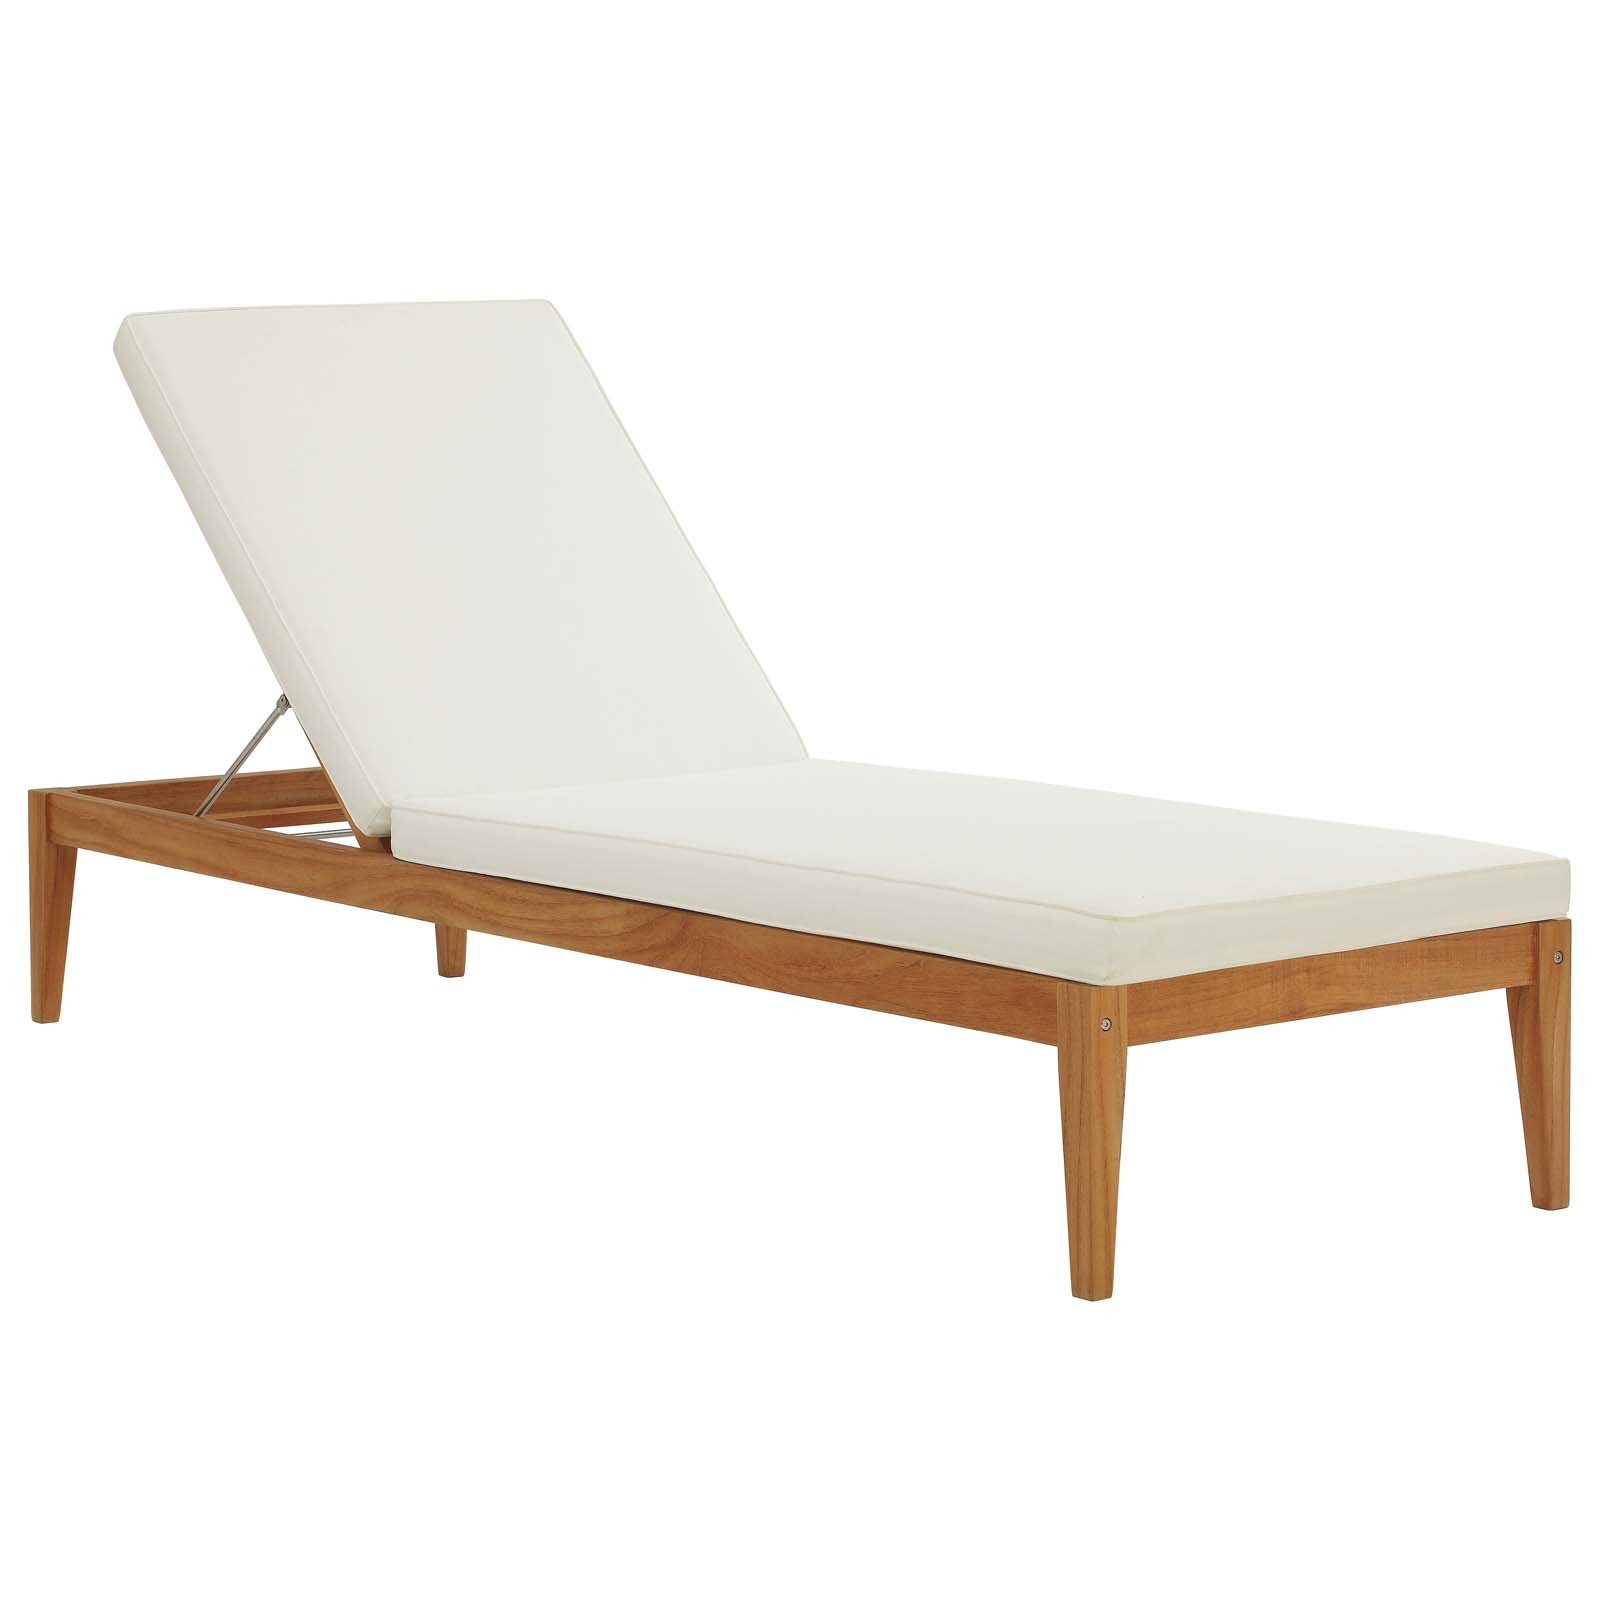 Northlake Outdoor Patio Premium Grade A Teak Wood Chaise Lounge in Natural White